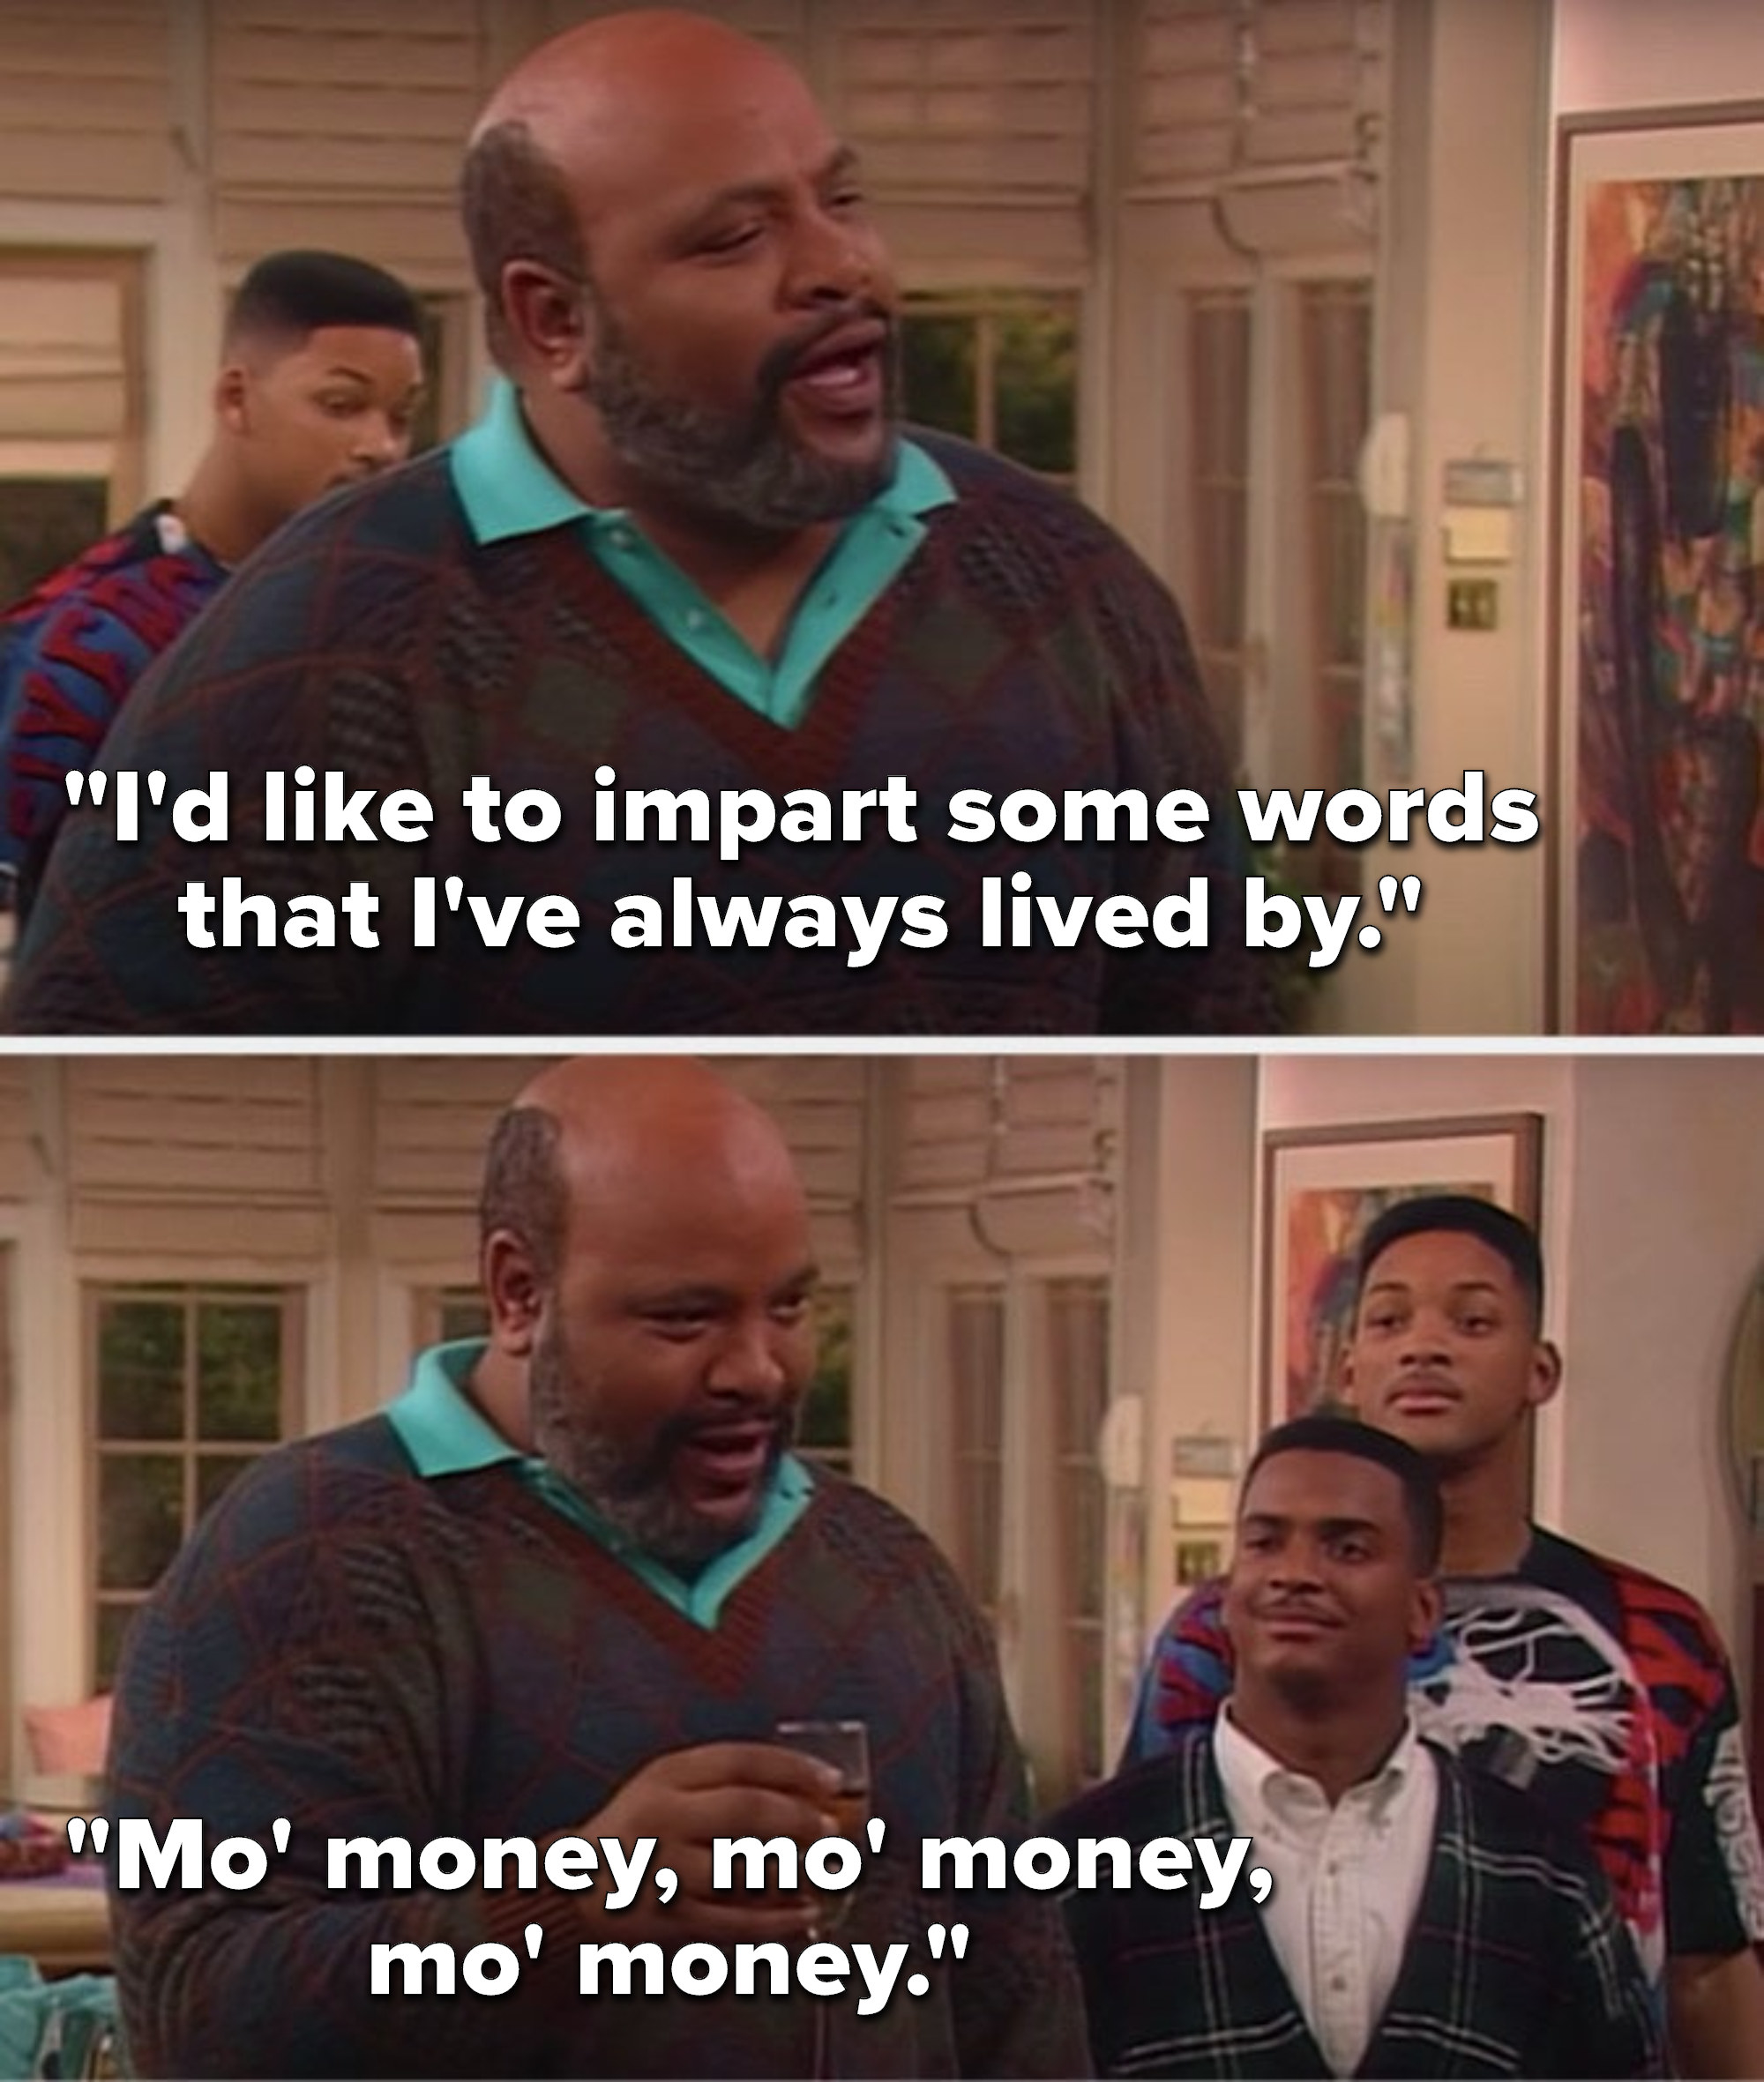 On The Fresh Prince of Bel Air, Uncle Phil says, I would like to impart some words that I always lived by, mo money, mo money, mo money